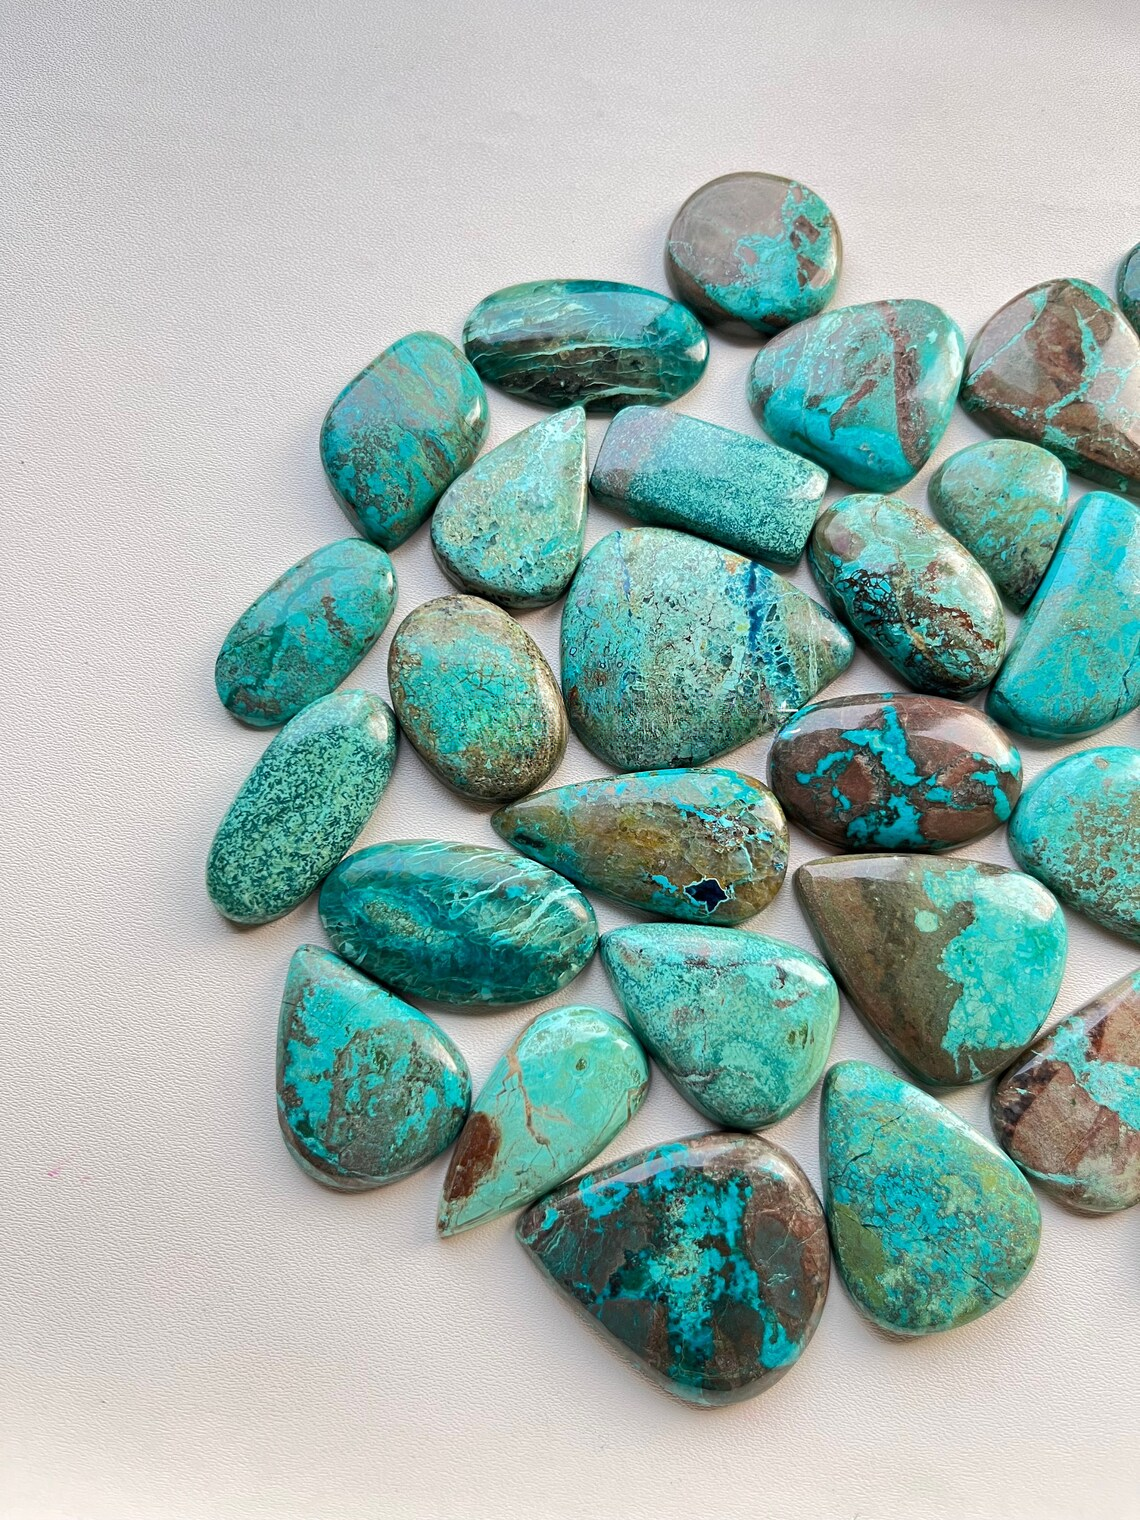 New Shattuckite Chrysocolla Cabochon Wholesale Lot Cabochon By Weight With Different Shapes And Sizes Used For Jewelry Making (Natural)